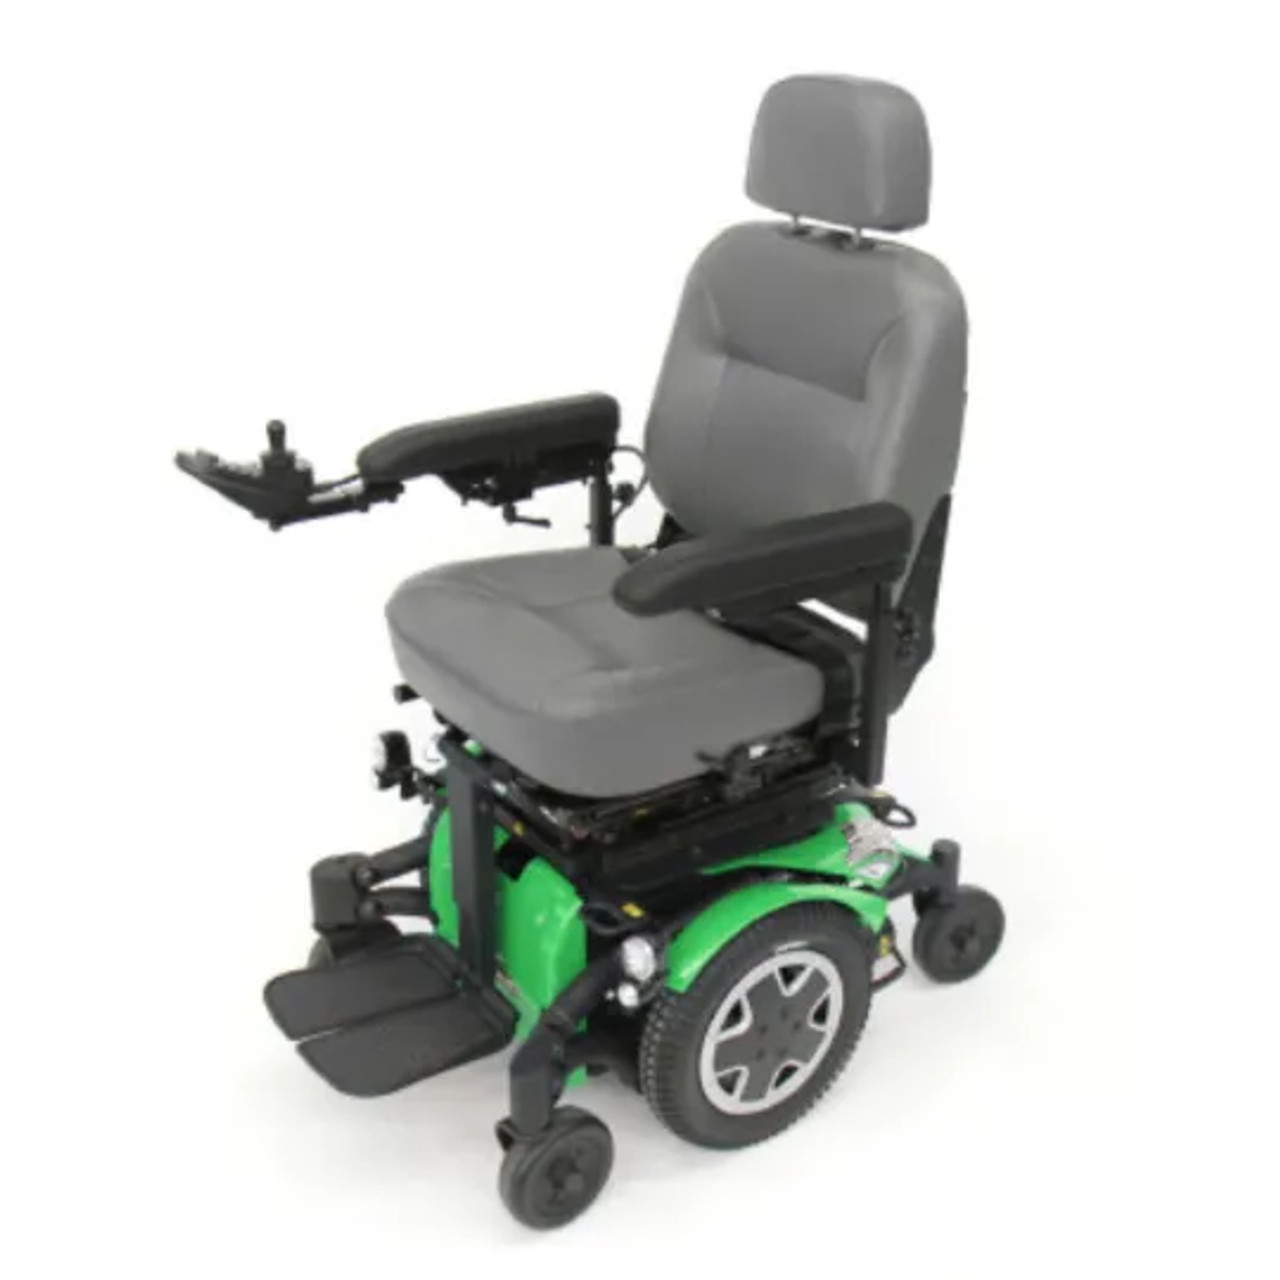 Invacare TDX SP2 Heavy Duty Power Wheelchair - Captain's Seat, LiNX Technology-Chicken Pieces